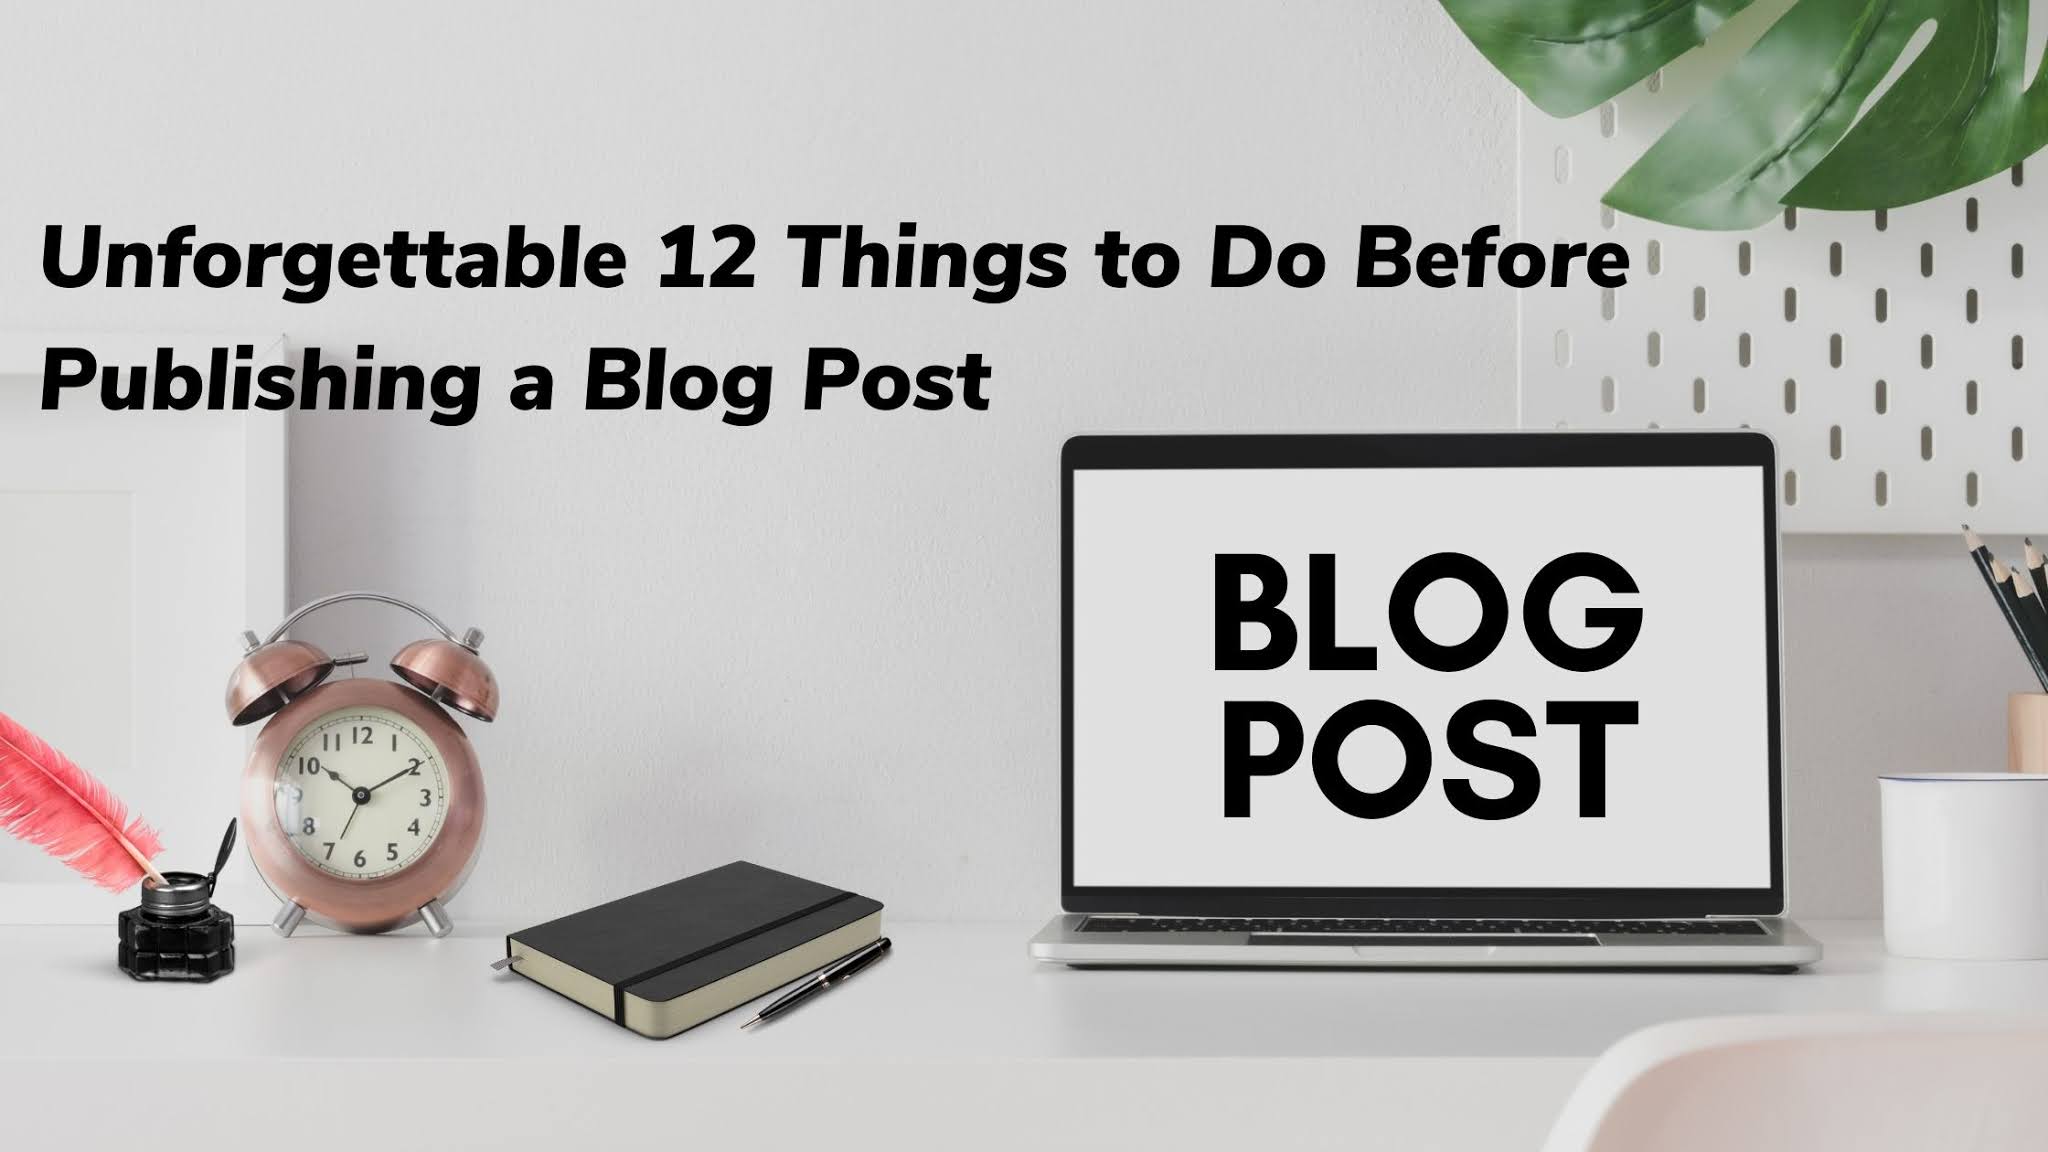 Things to Do Before Publishing a Blog Post